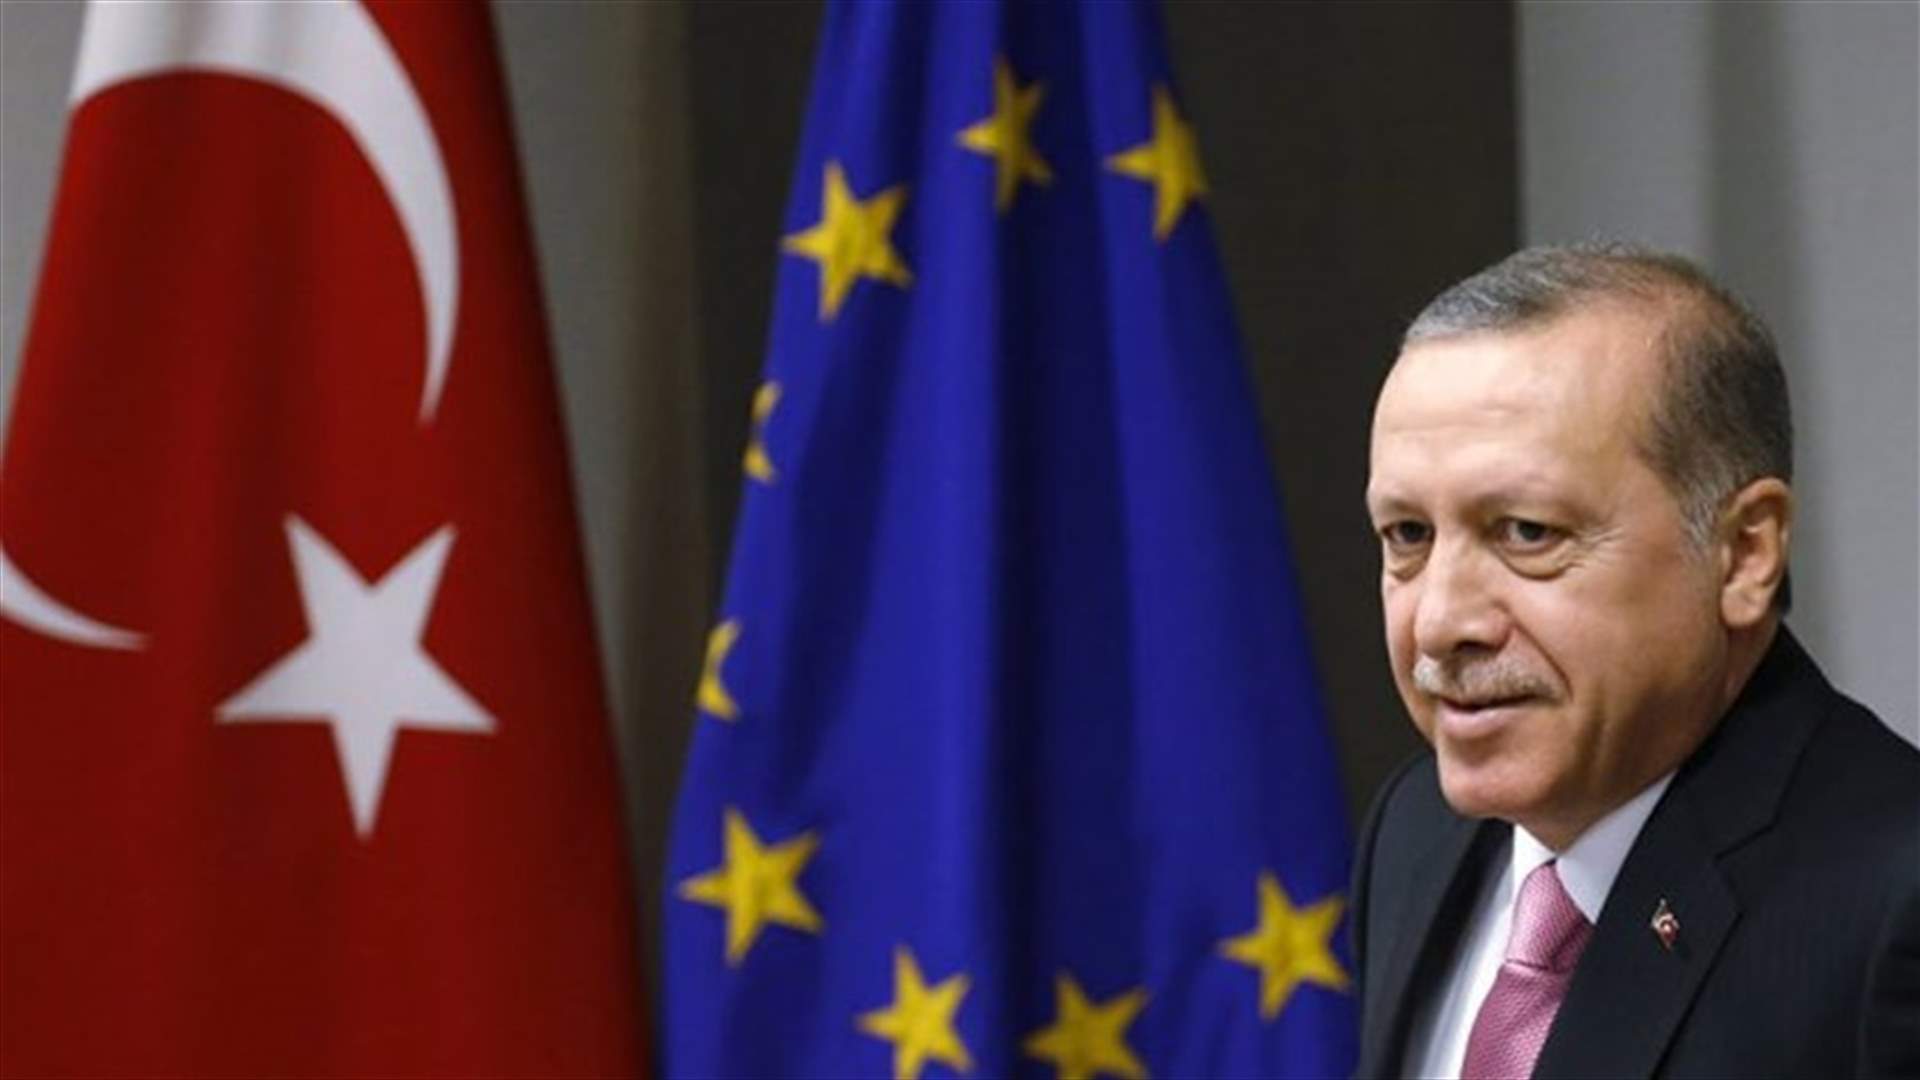 Erdogan says Turkey could reconsider its position on Europe